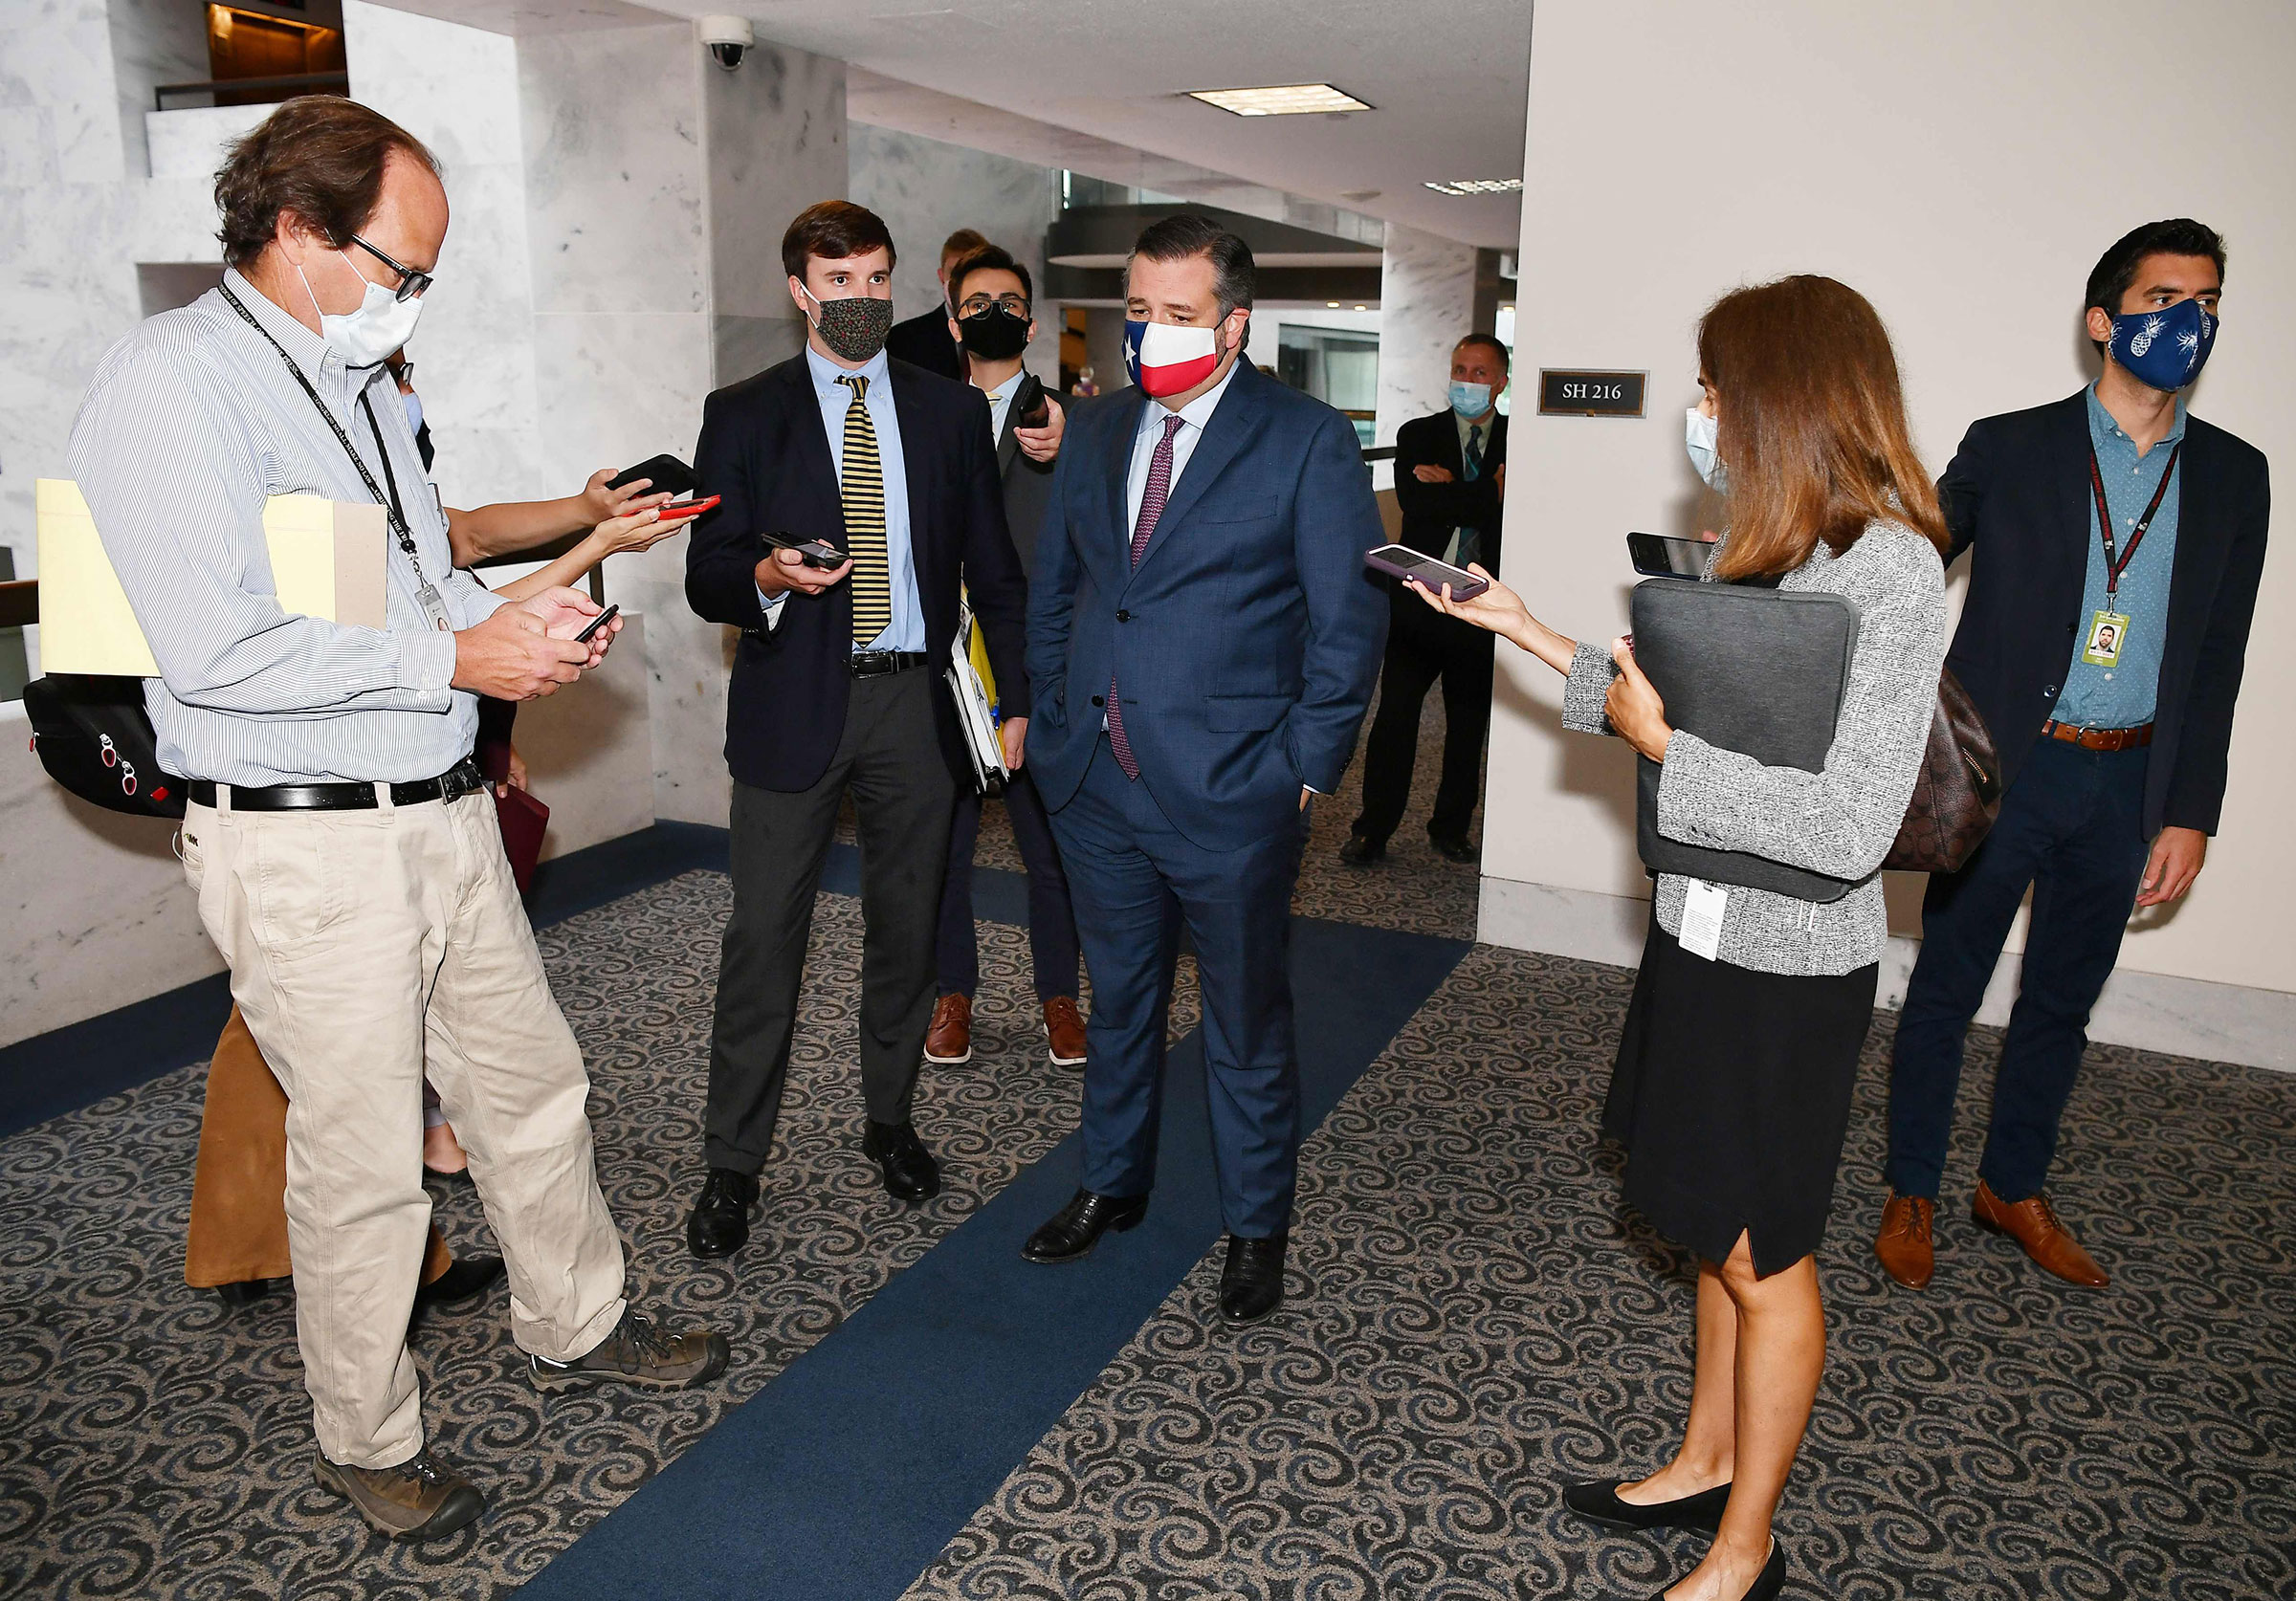 Senator Ted Cruz arrives for the Senate Republican luncheon at the Hart Senate Office Building on Capitol Hill on Aug. 4, 2020. (Mandel Ngan—AFP/Getty Images)